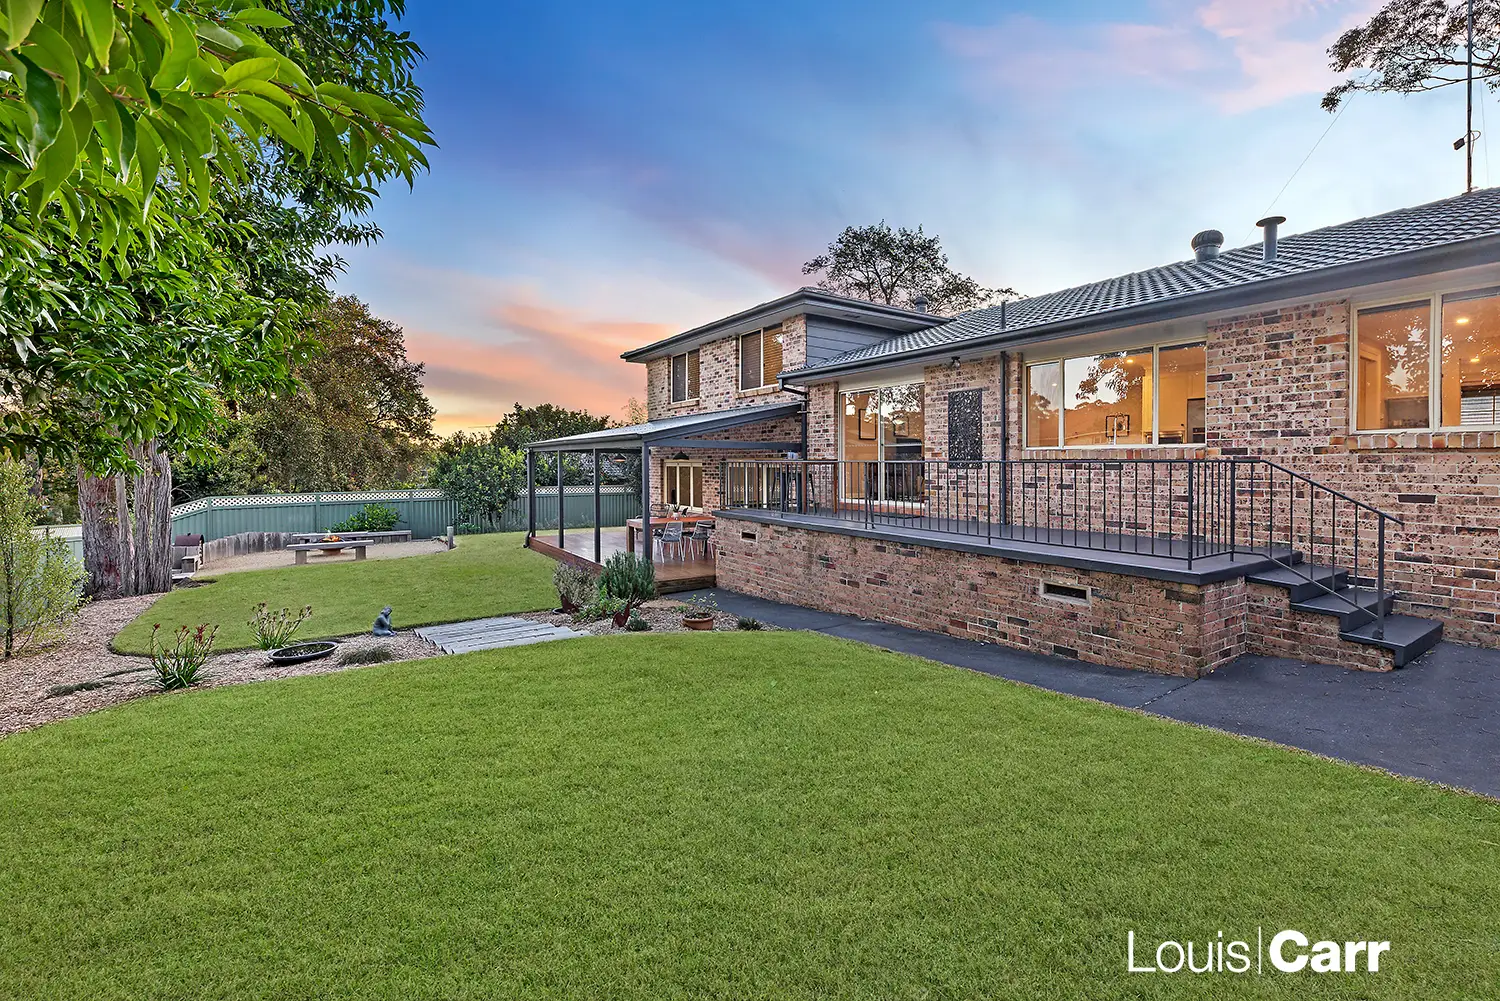 Photo #6: 23 Yaringa Road, Castle Hill - Sold by Louis Carr Real Estate